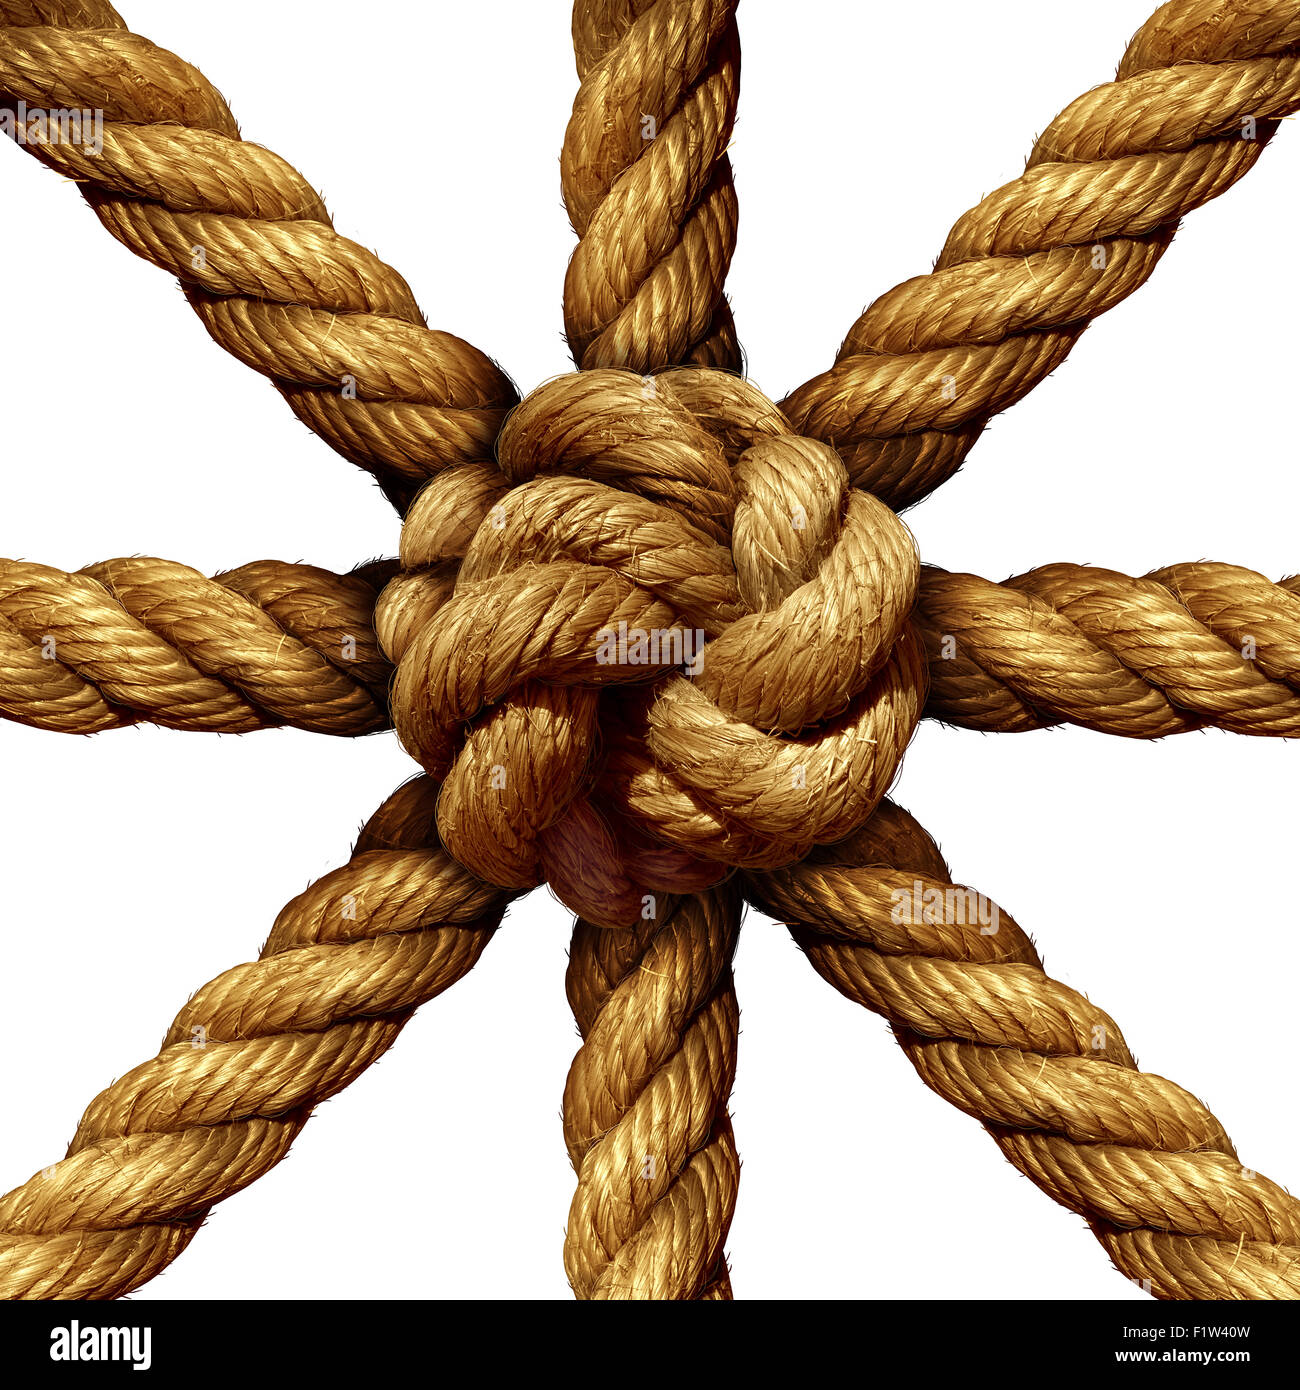 Connected Group business concept and unity symbol as a collection of thick ropes coming together tied in a knot at the center as a symbol for network strength and unity support isolated on a white background. Stock Photo